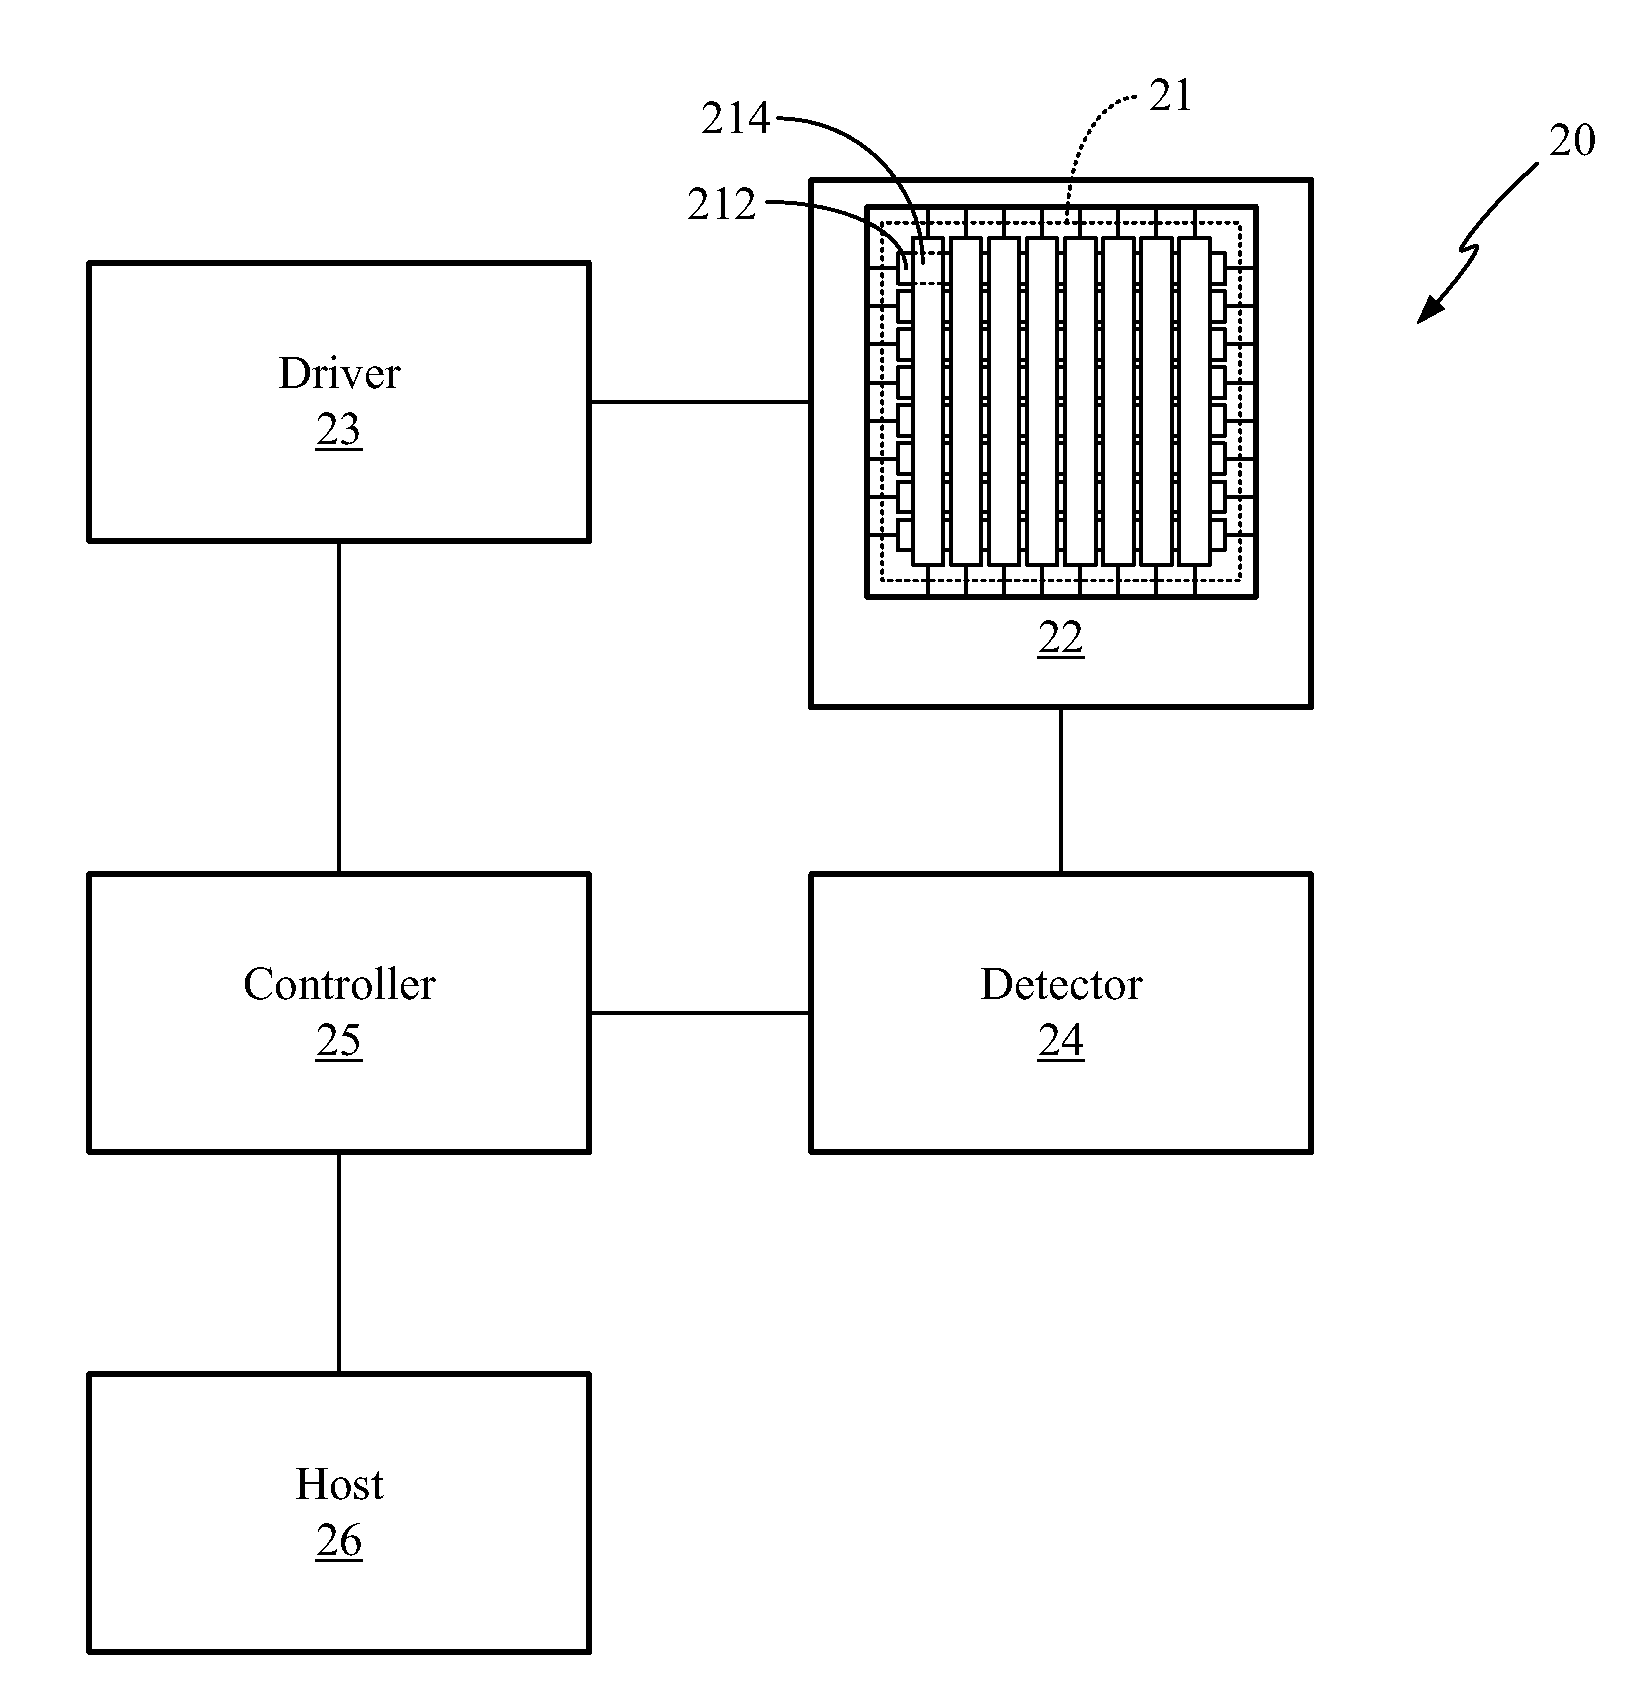 Method and Device for Position Detection